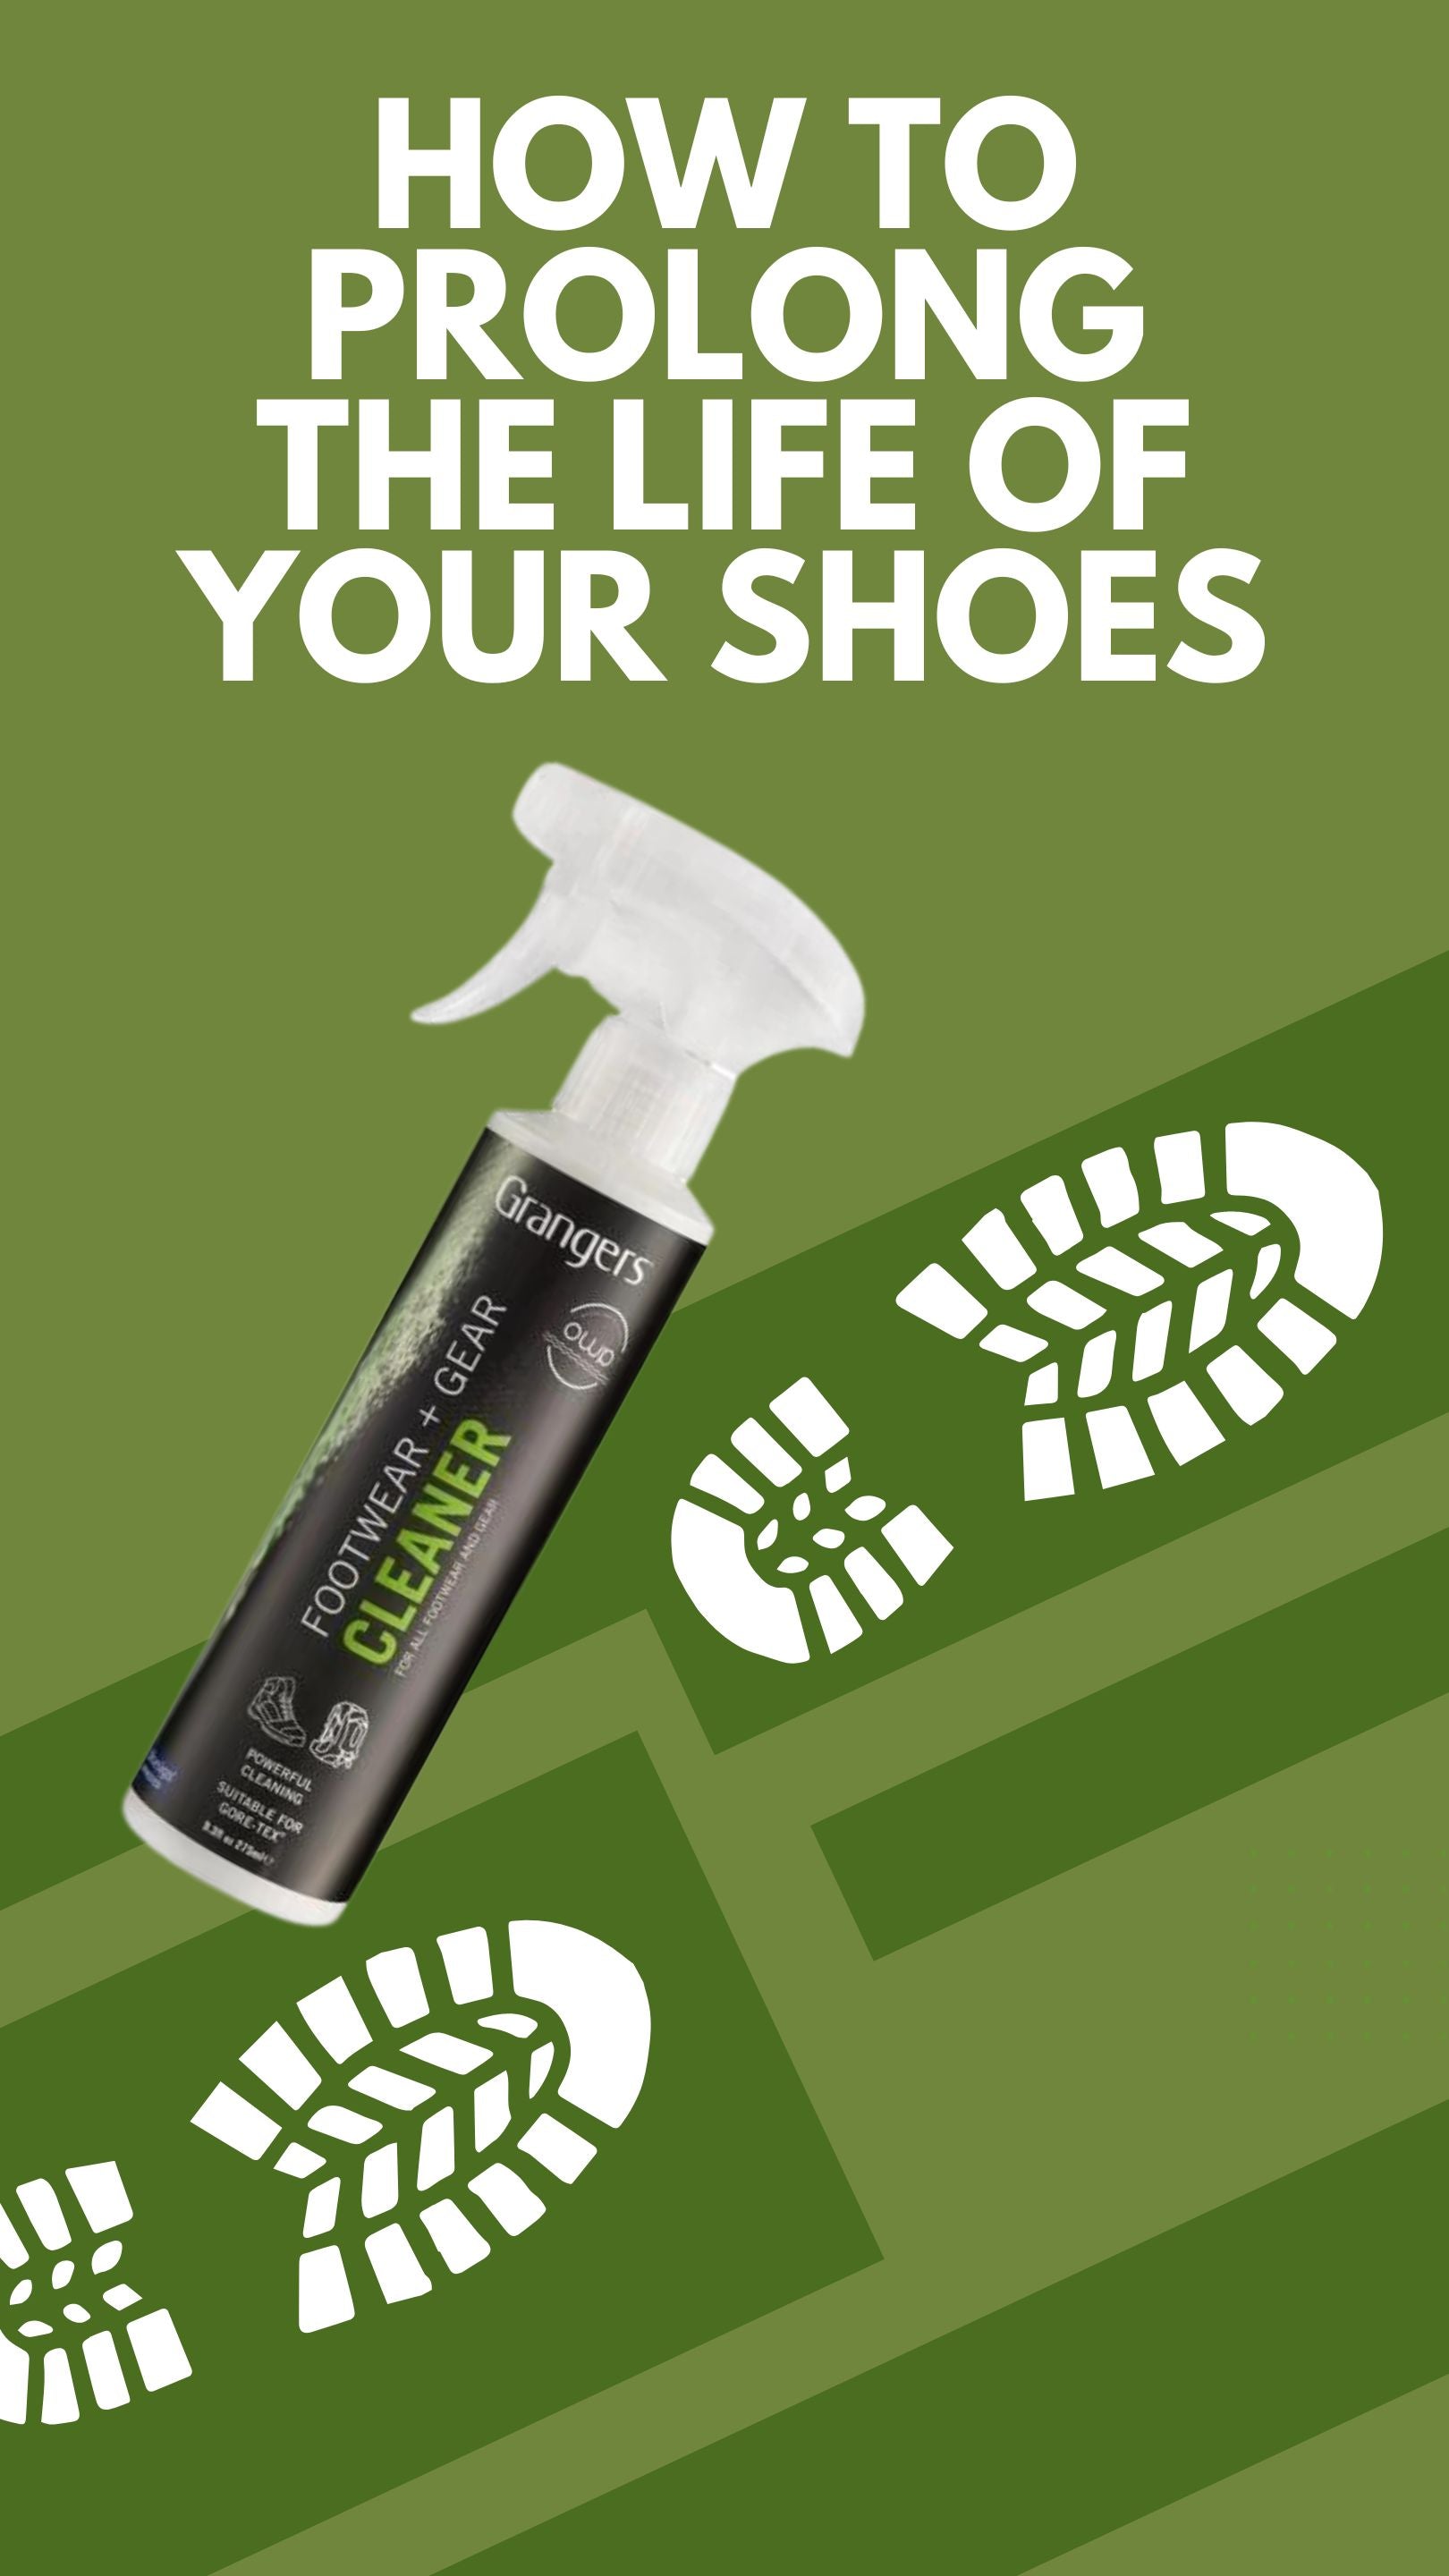 How to prolong the life of your hiking shoes.